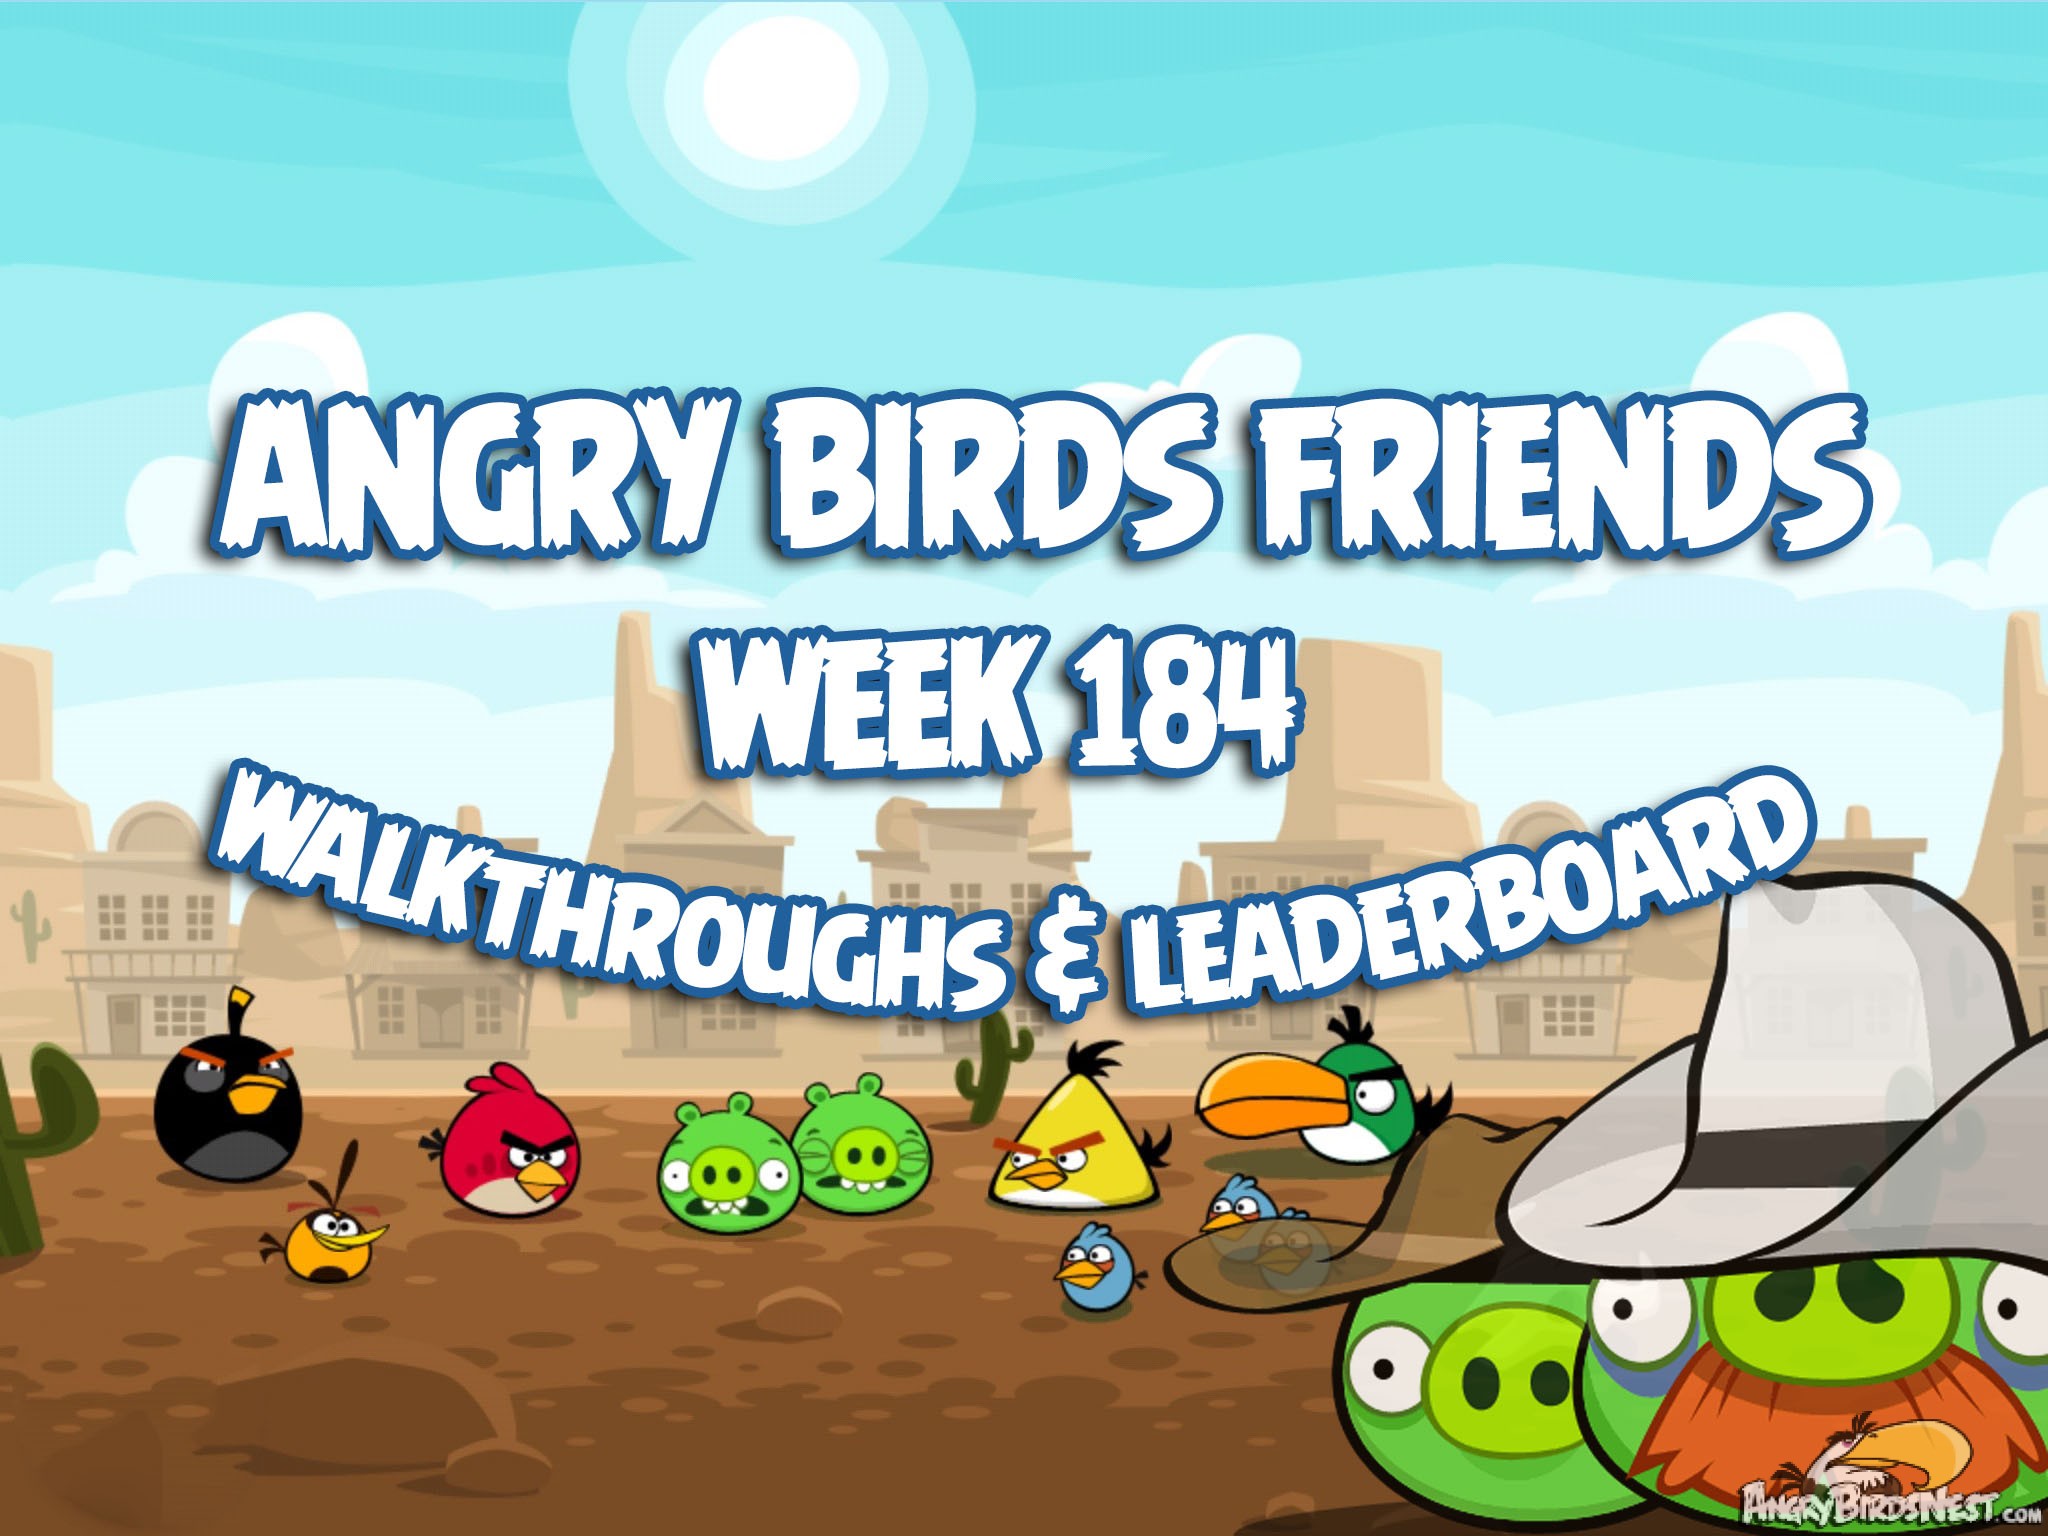 Angry Birds Friends Tournament Week 184 Feature Image